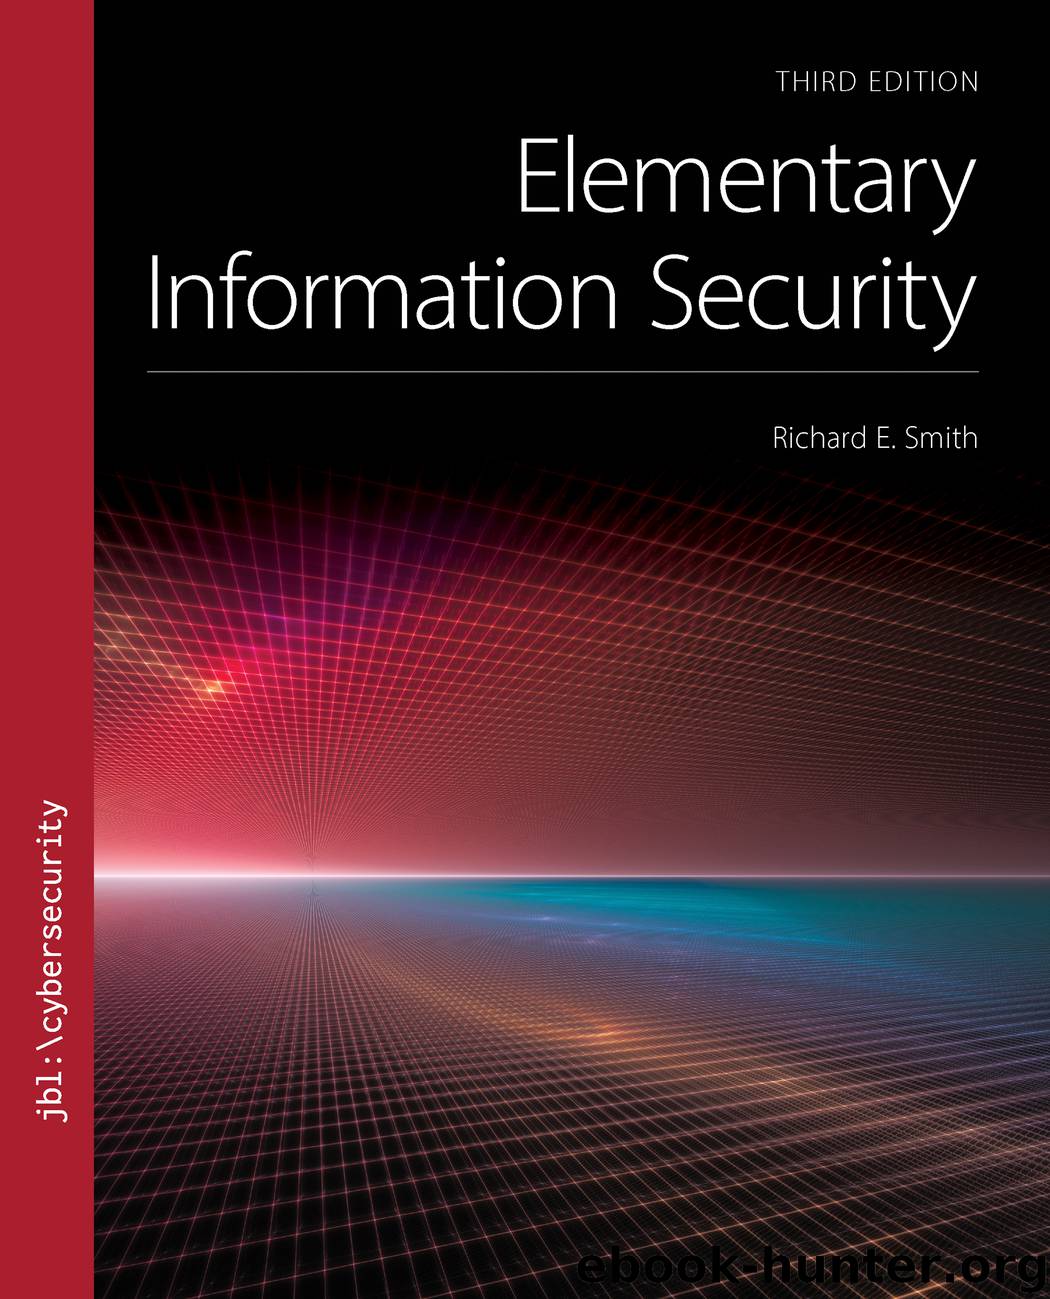 Elementary Information Security, 3rd Edition by Richard E. Smith